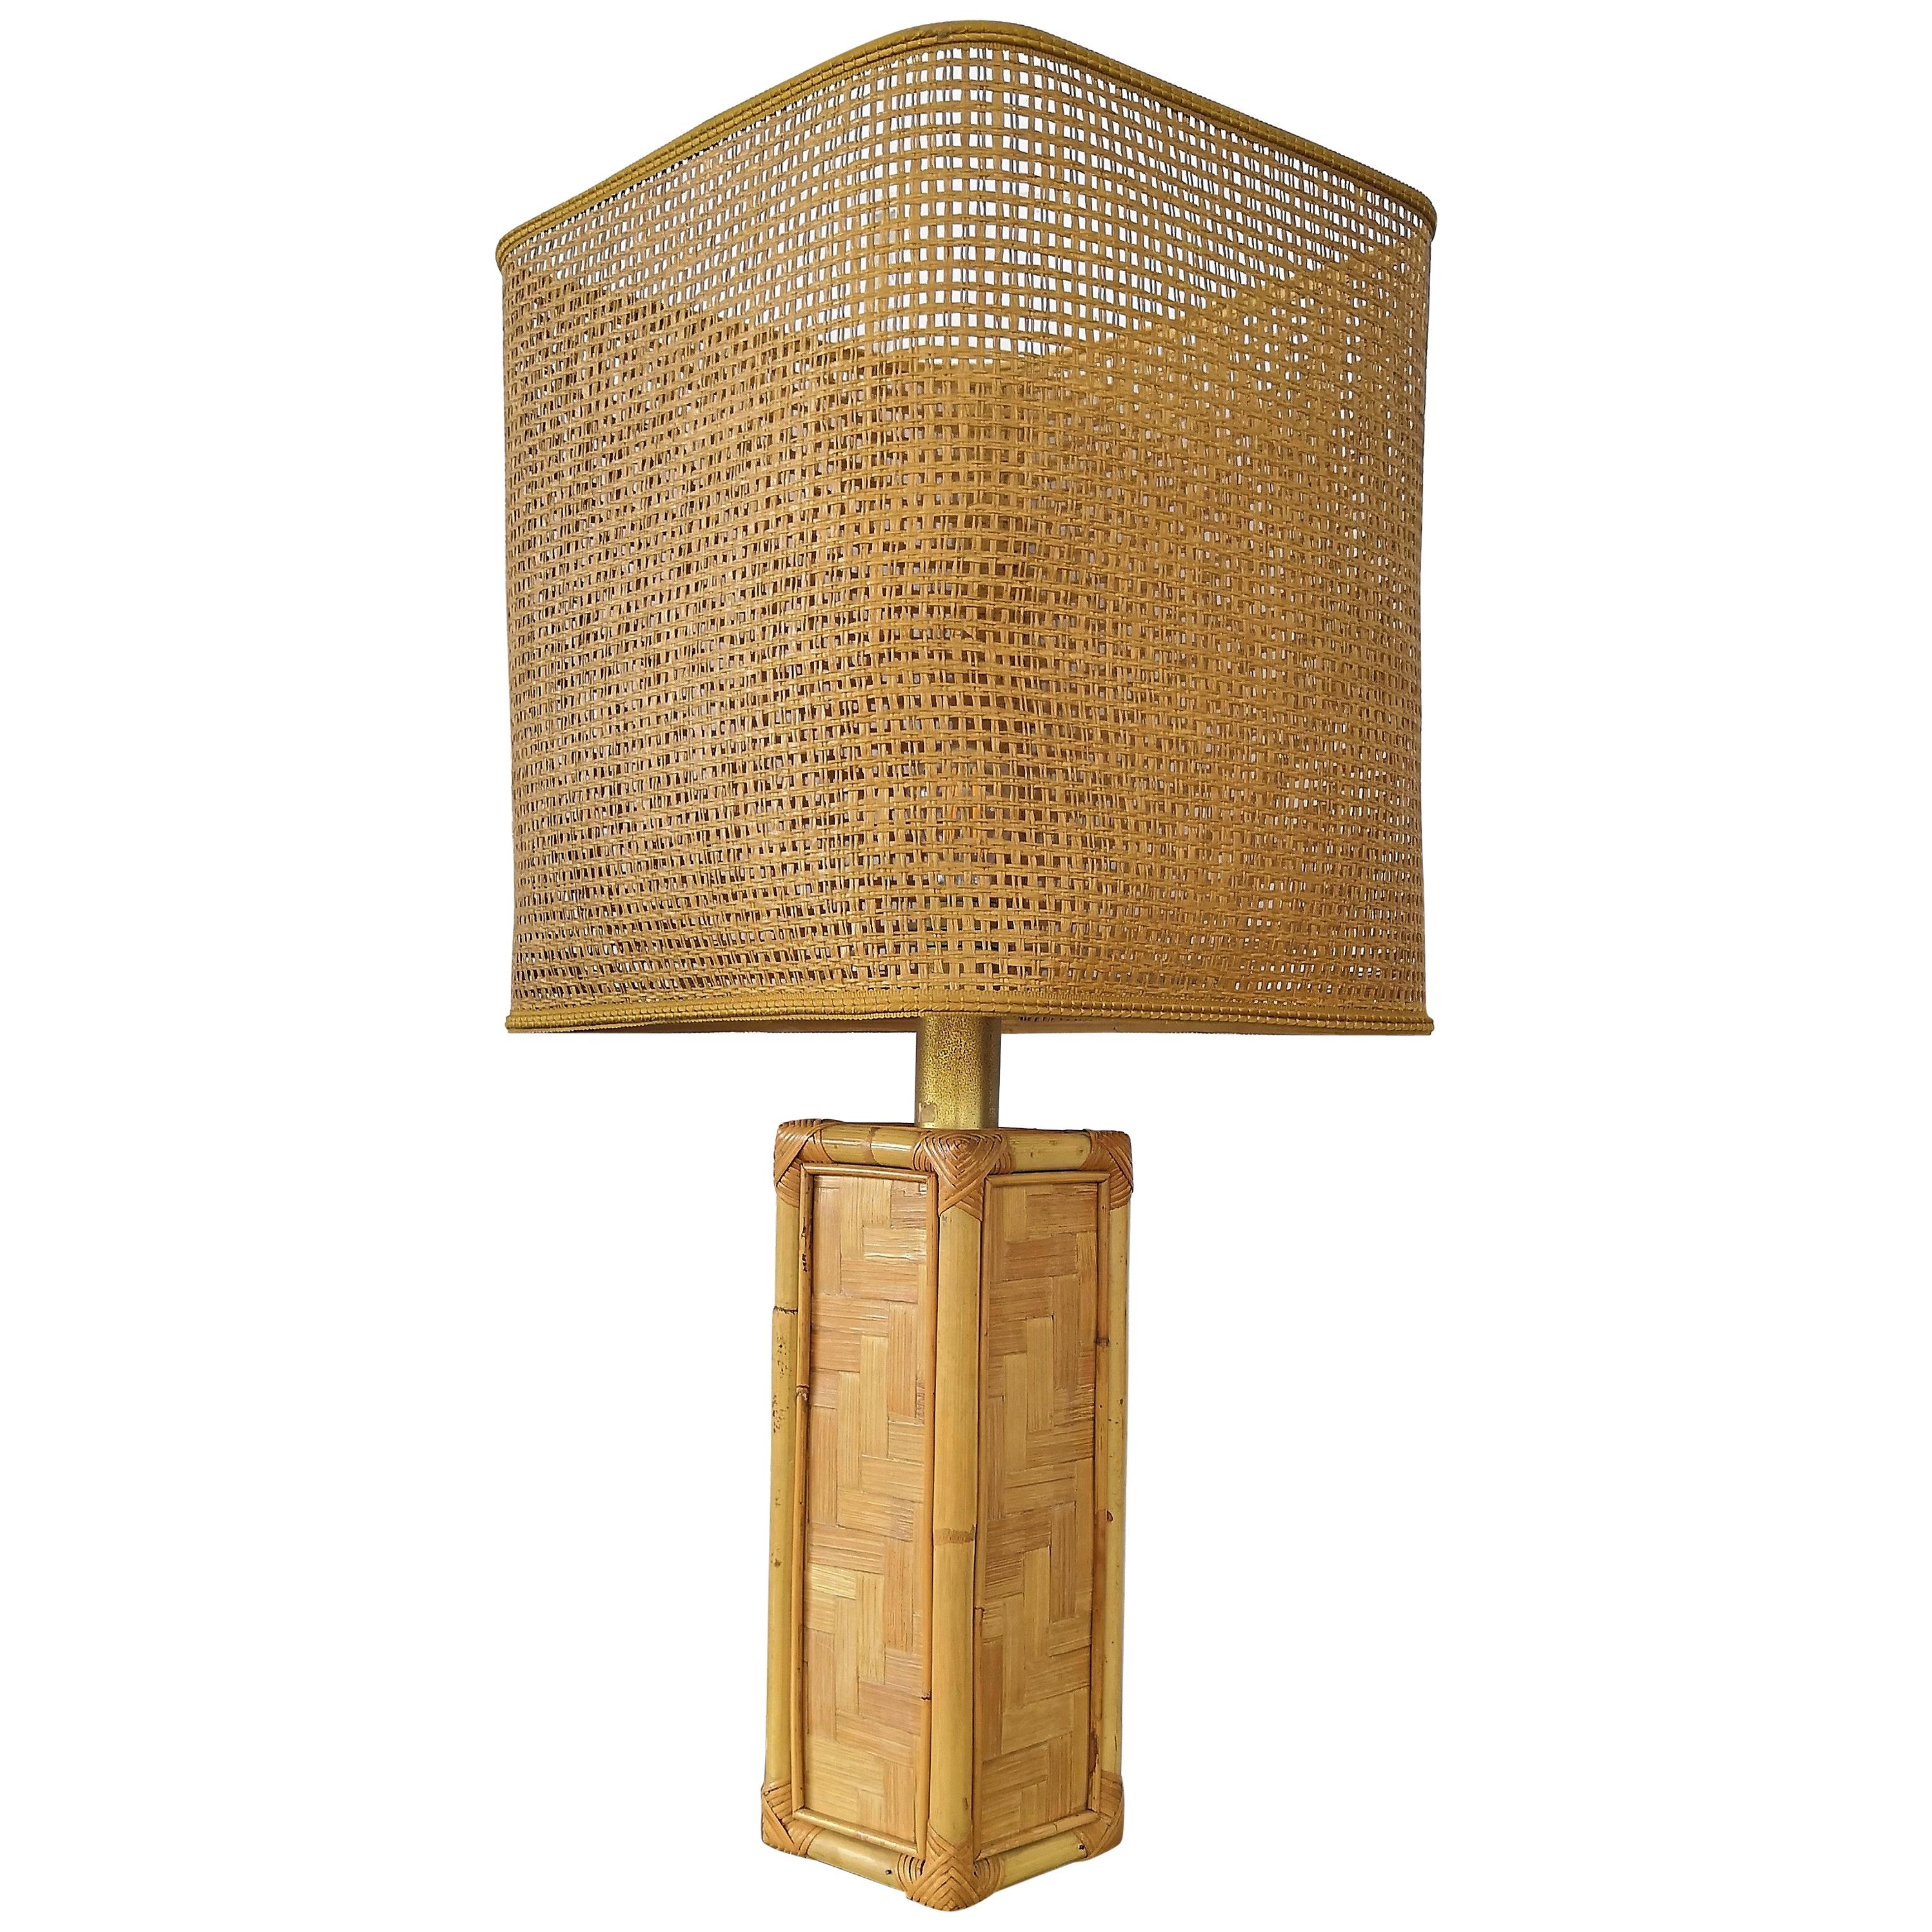 Midcentury Vintage Italian Rattan Bamboo Cane and Brass Table Lamp For Sale